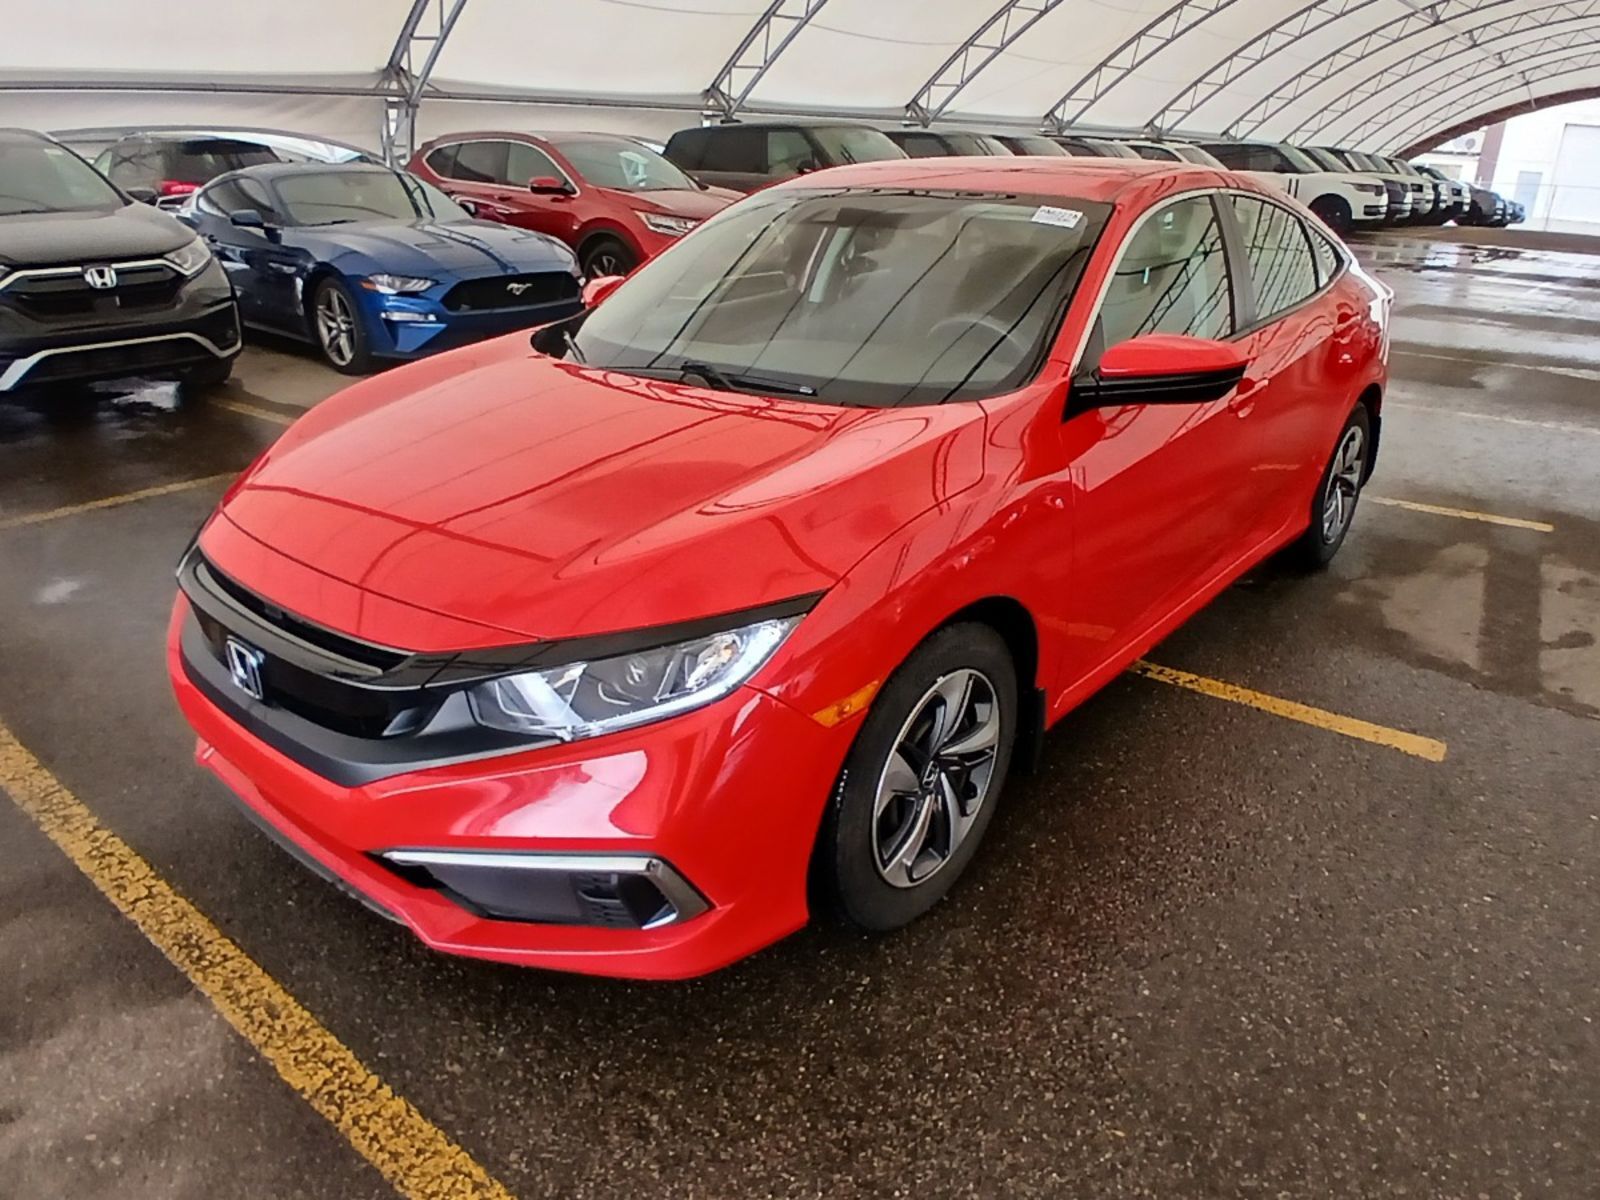 2019 Honda Civic Sedan LX - No Accidents | One Owner | Heated Front Seats